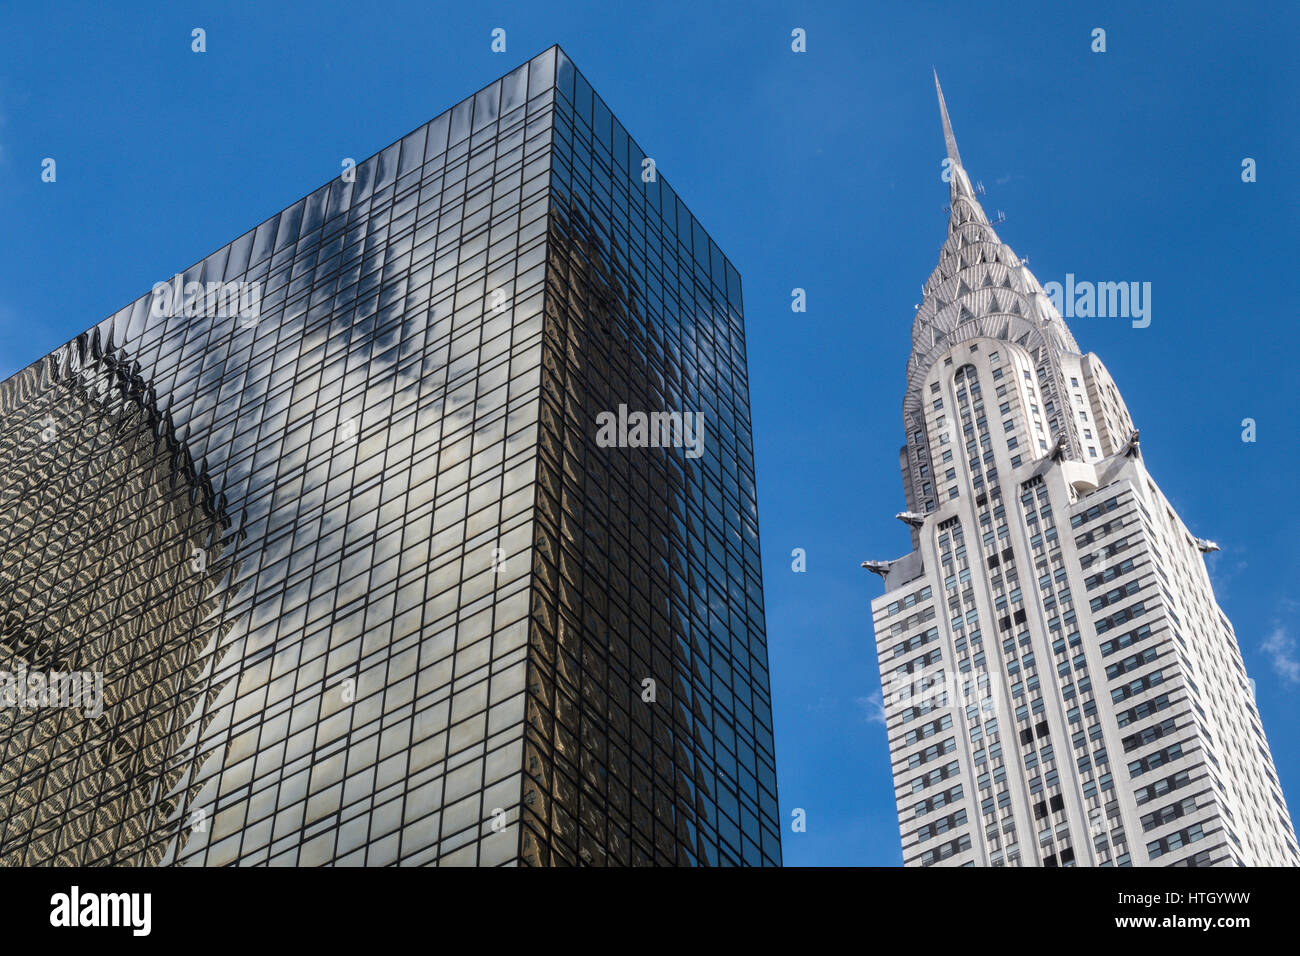 Looking up at the Iconic Chrysler Building, Midtown Manhattan, NYC, USA Stock Photo